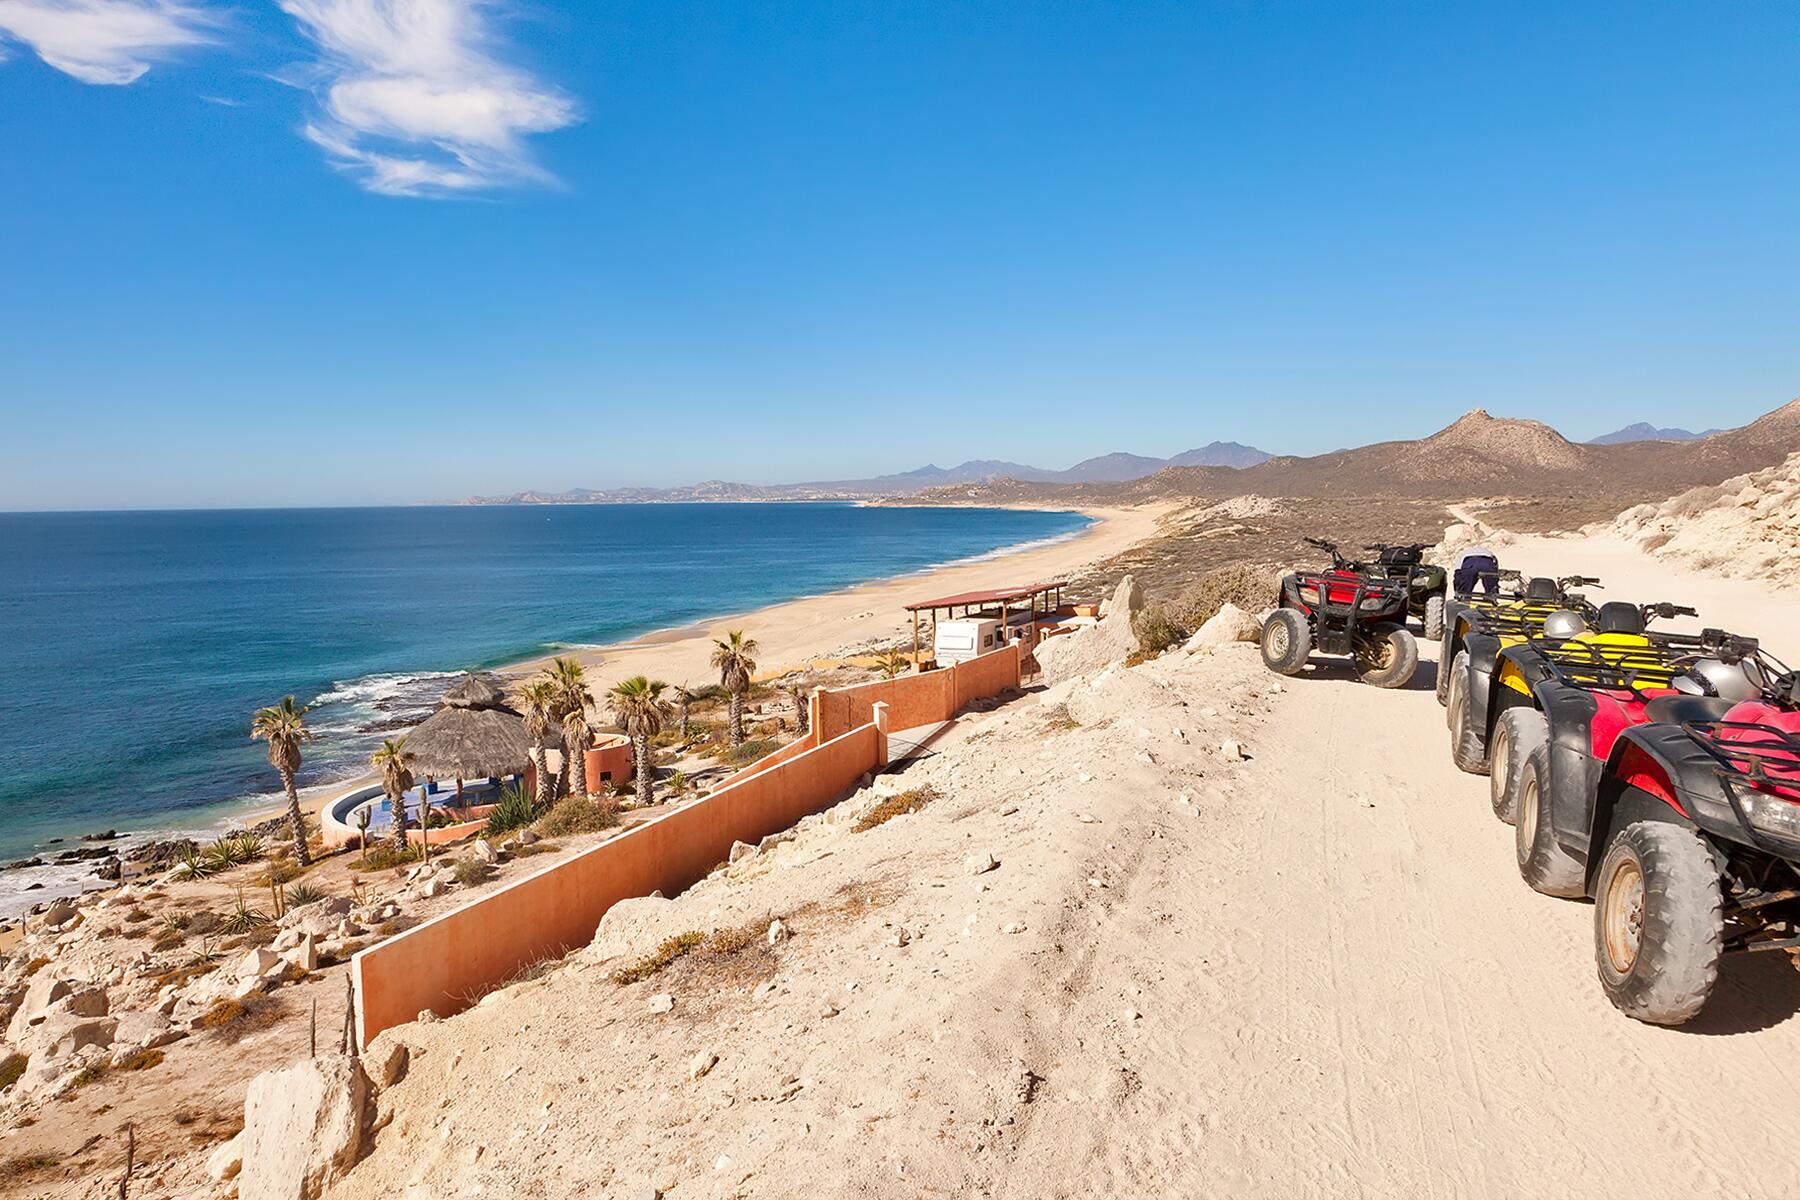 <a href='https://www.fodors.com/world/mexico-and-central-america/mexico/los-cabos/experiences/news/photos/best-outdoor-activities-and-things-to-do-in-los-cabos#'>From &quot;The 10 Best Outdoor Activities in Los Cabos: Having an Adrenaline-Pumping Experience with G-Force Adventures&quot;</a>